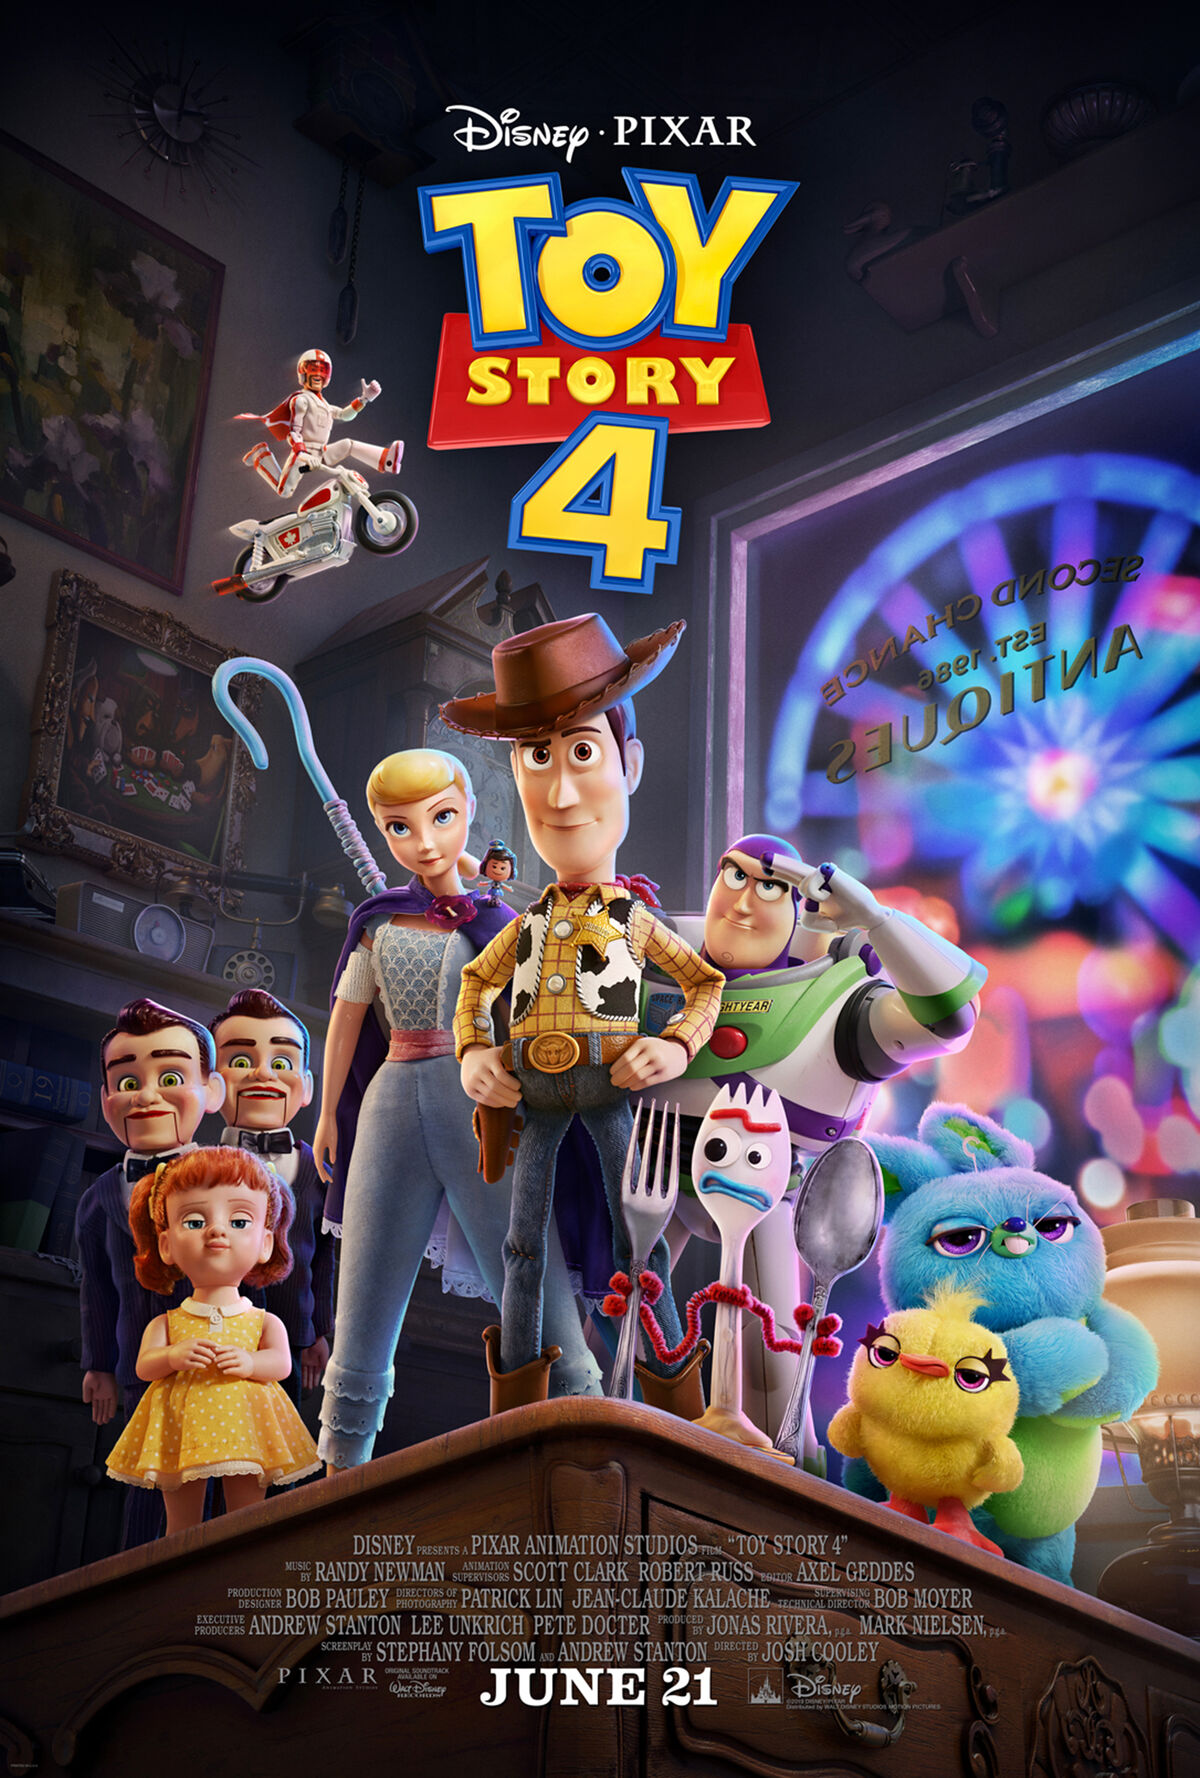 Poster Toy Story 4 - Adventure Of A Lifetime